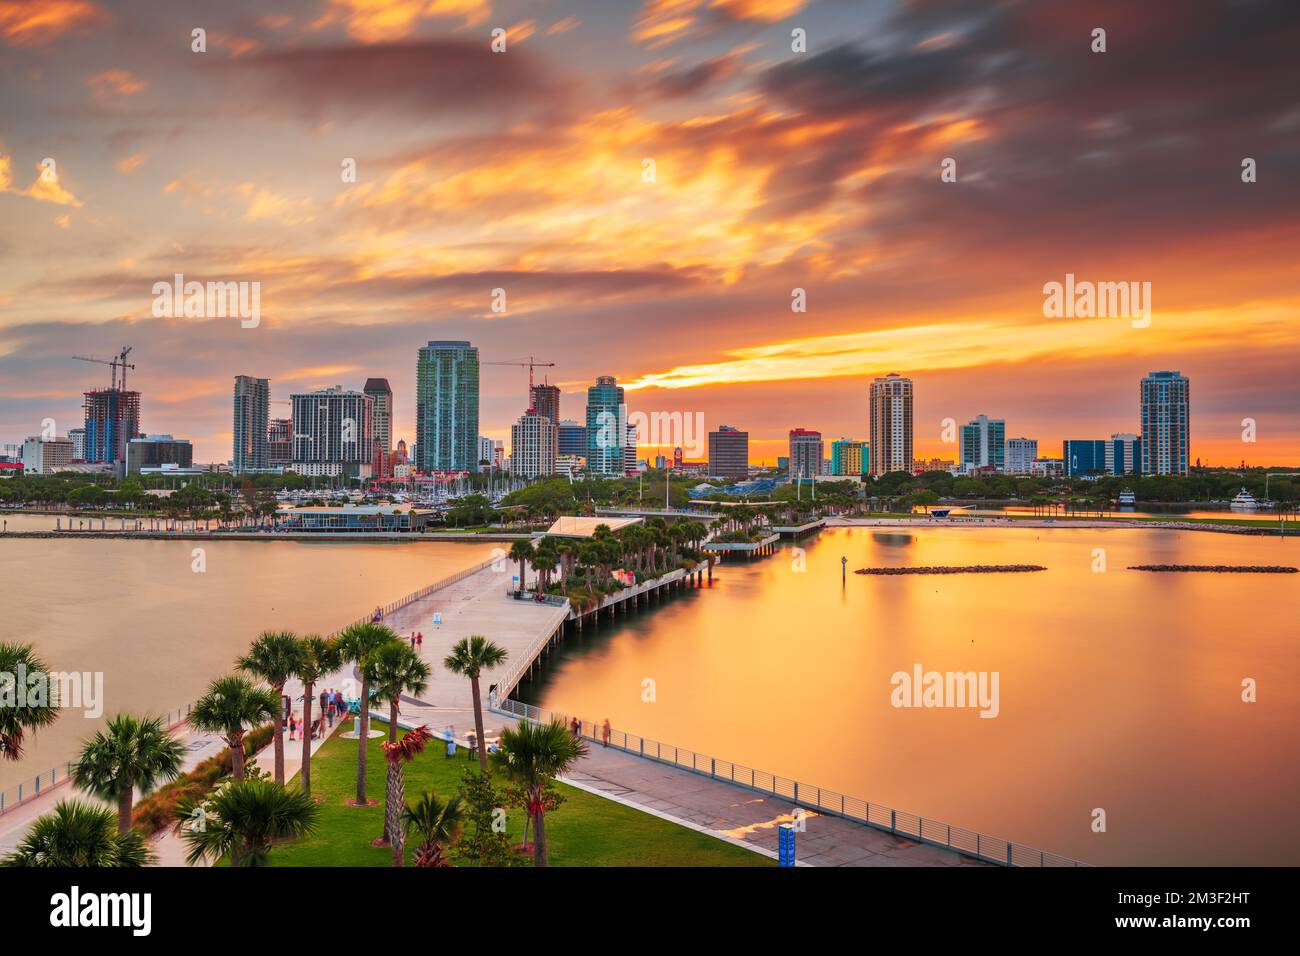 St. Pete, Florida, USA downtown city skyline on the bay at dusk. Stock Photo